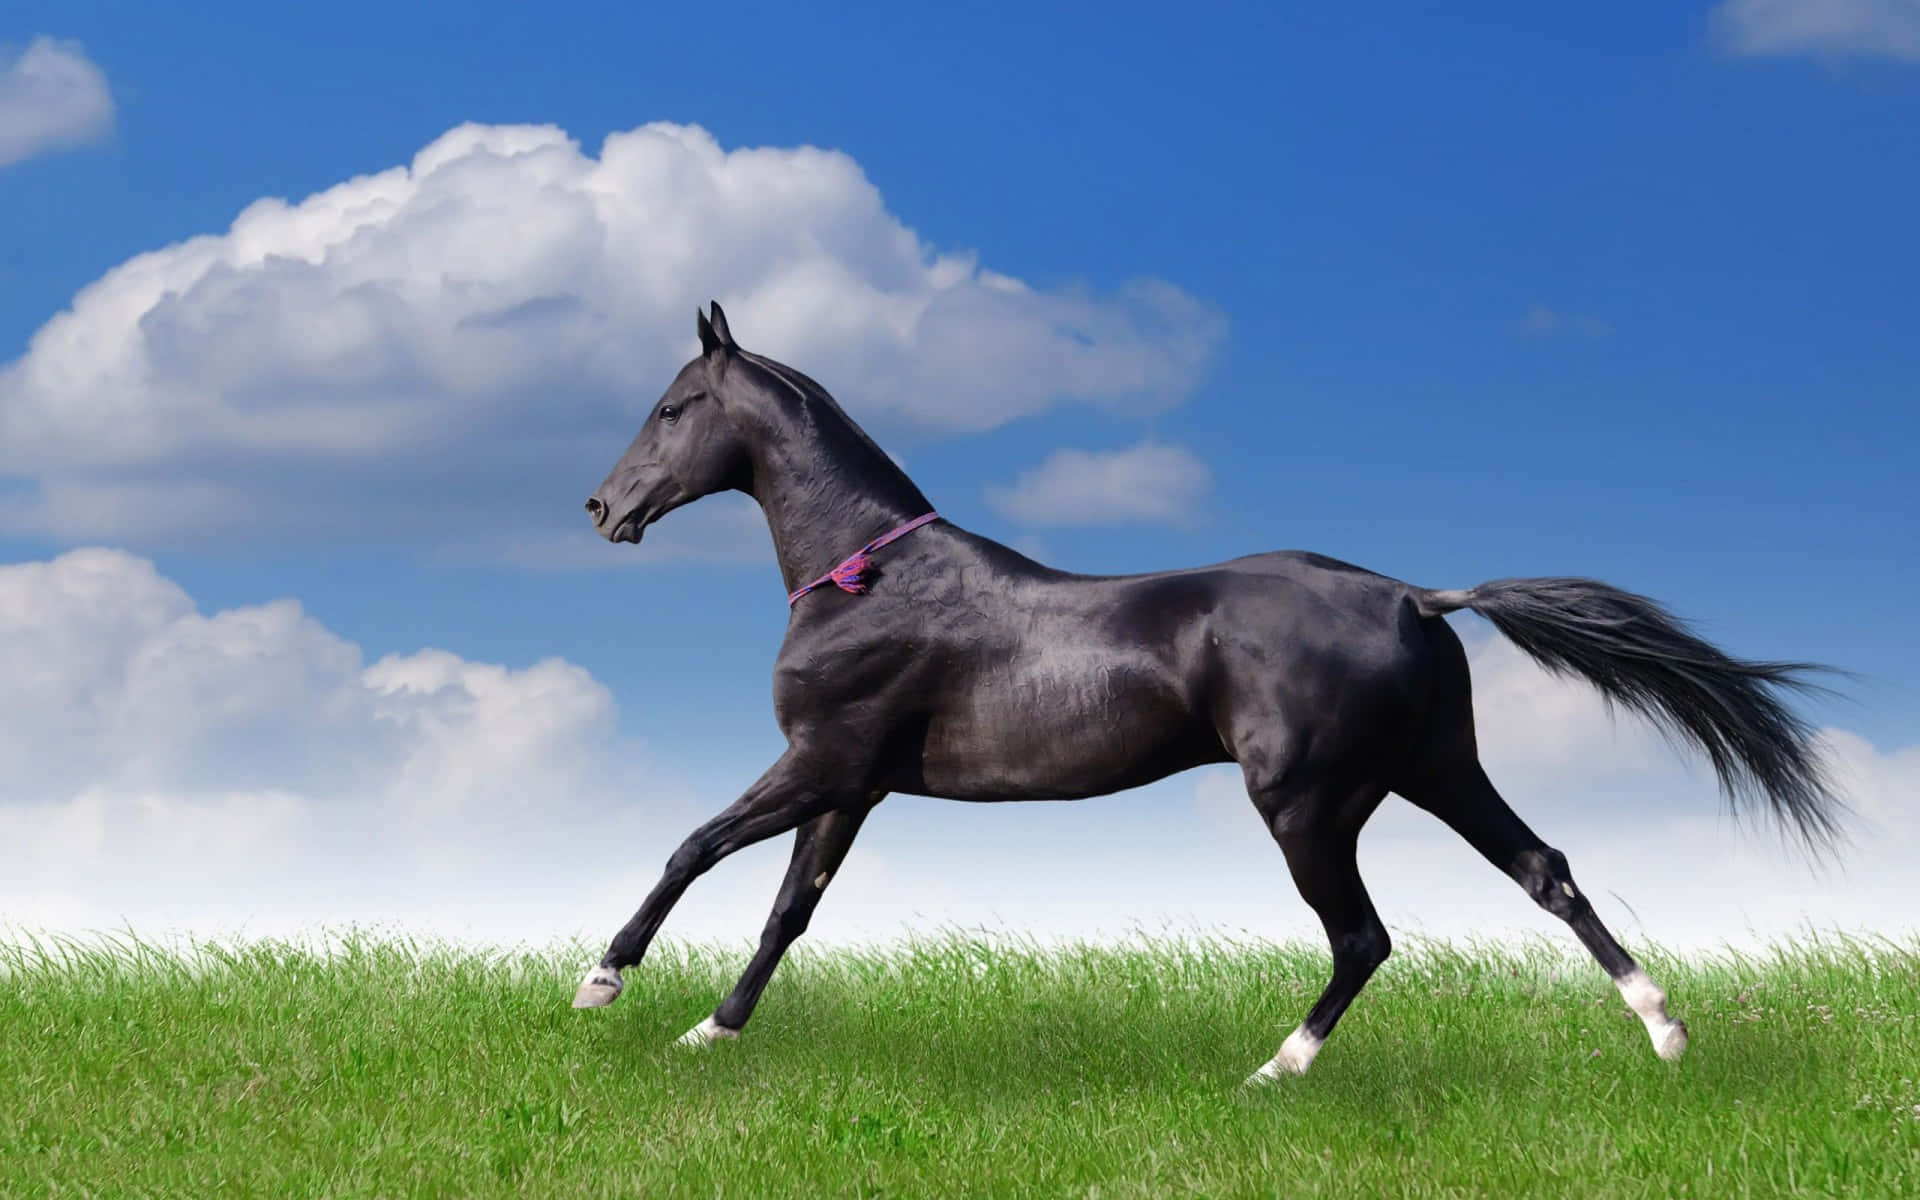 Majestic Black Horse Grazing on a Sunny Day